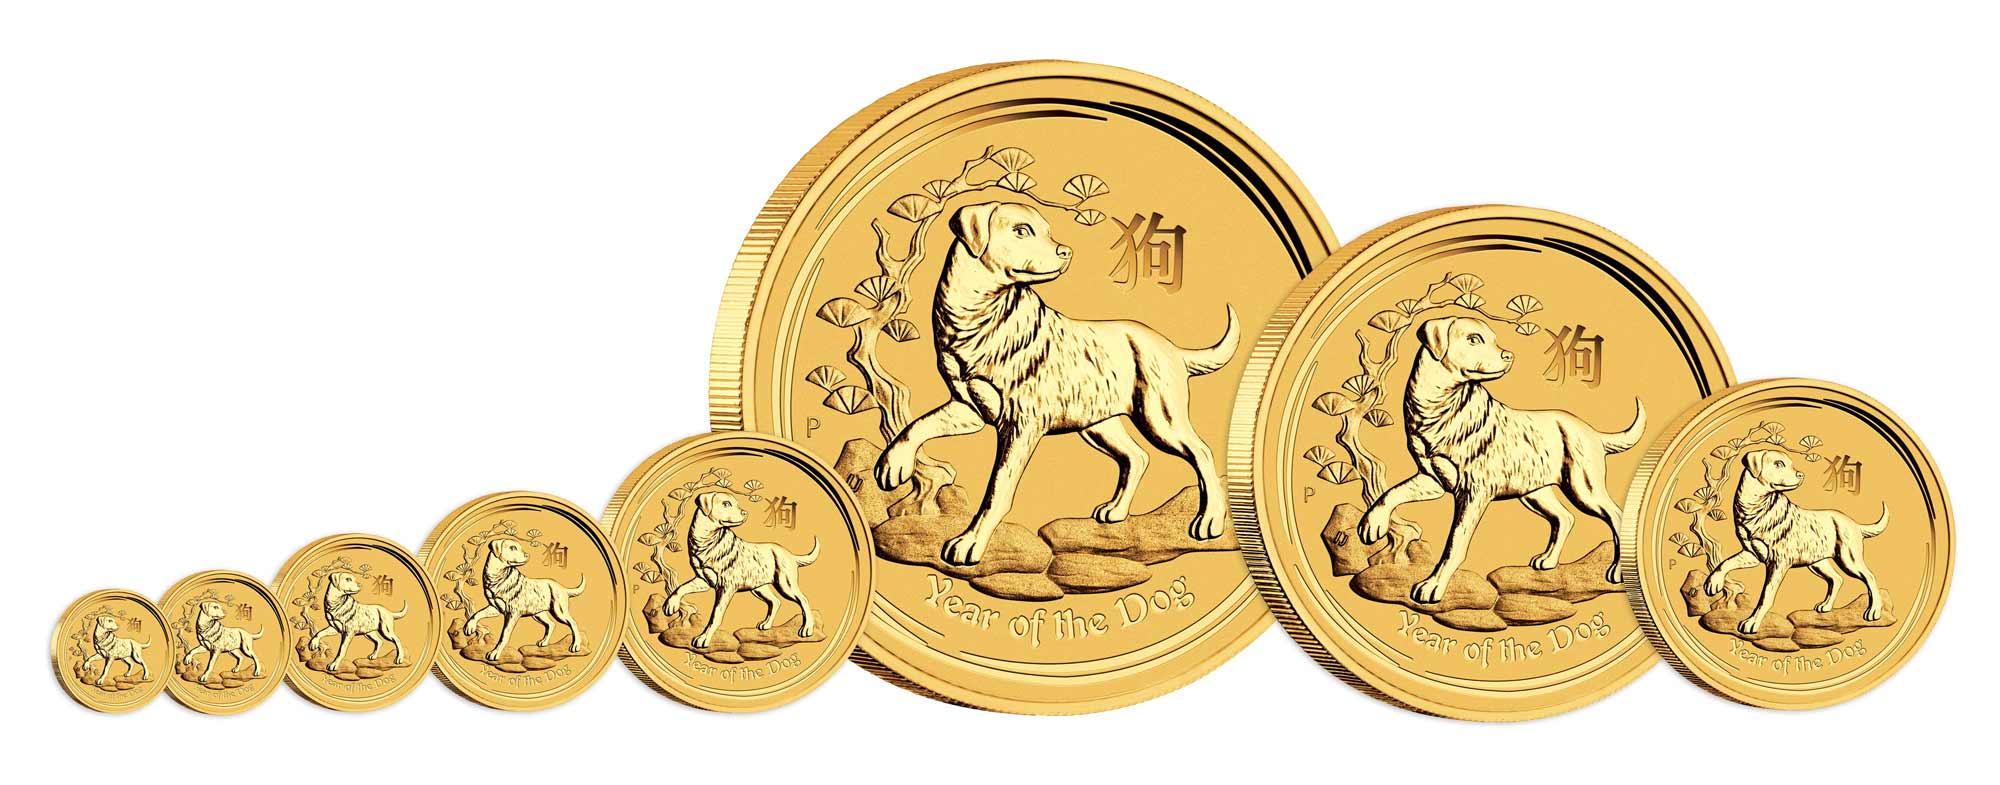 Zodiac Coin Year of The Dog UNC Proof New 2018 Year R226